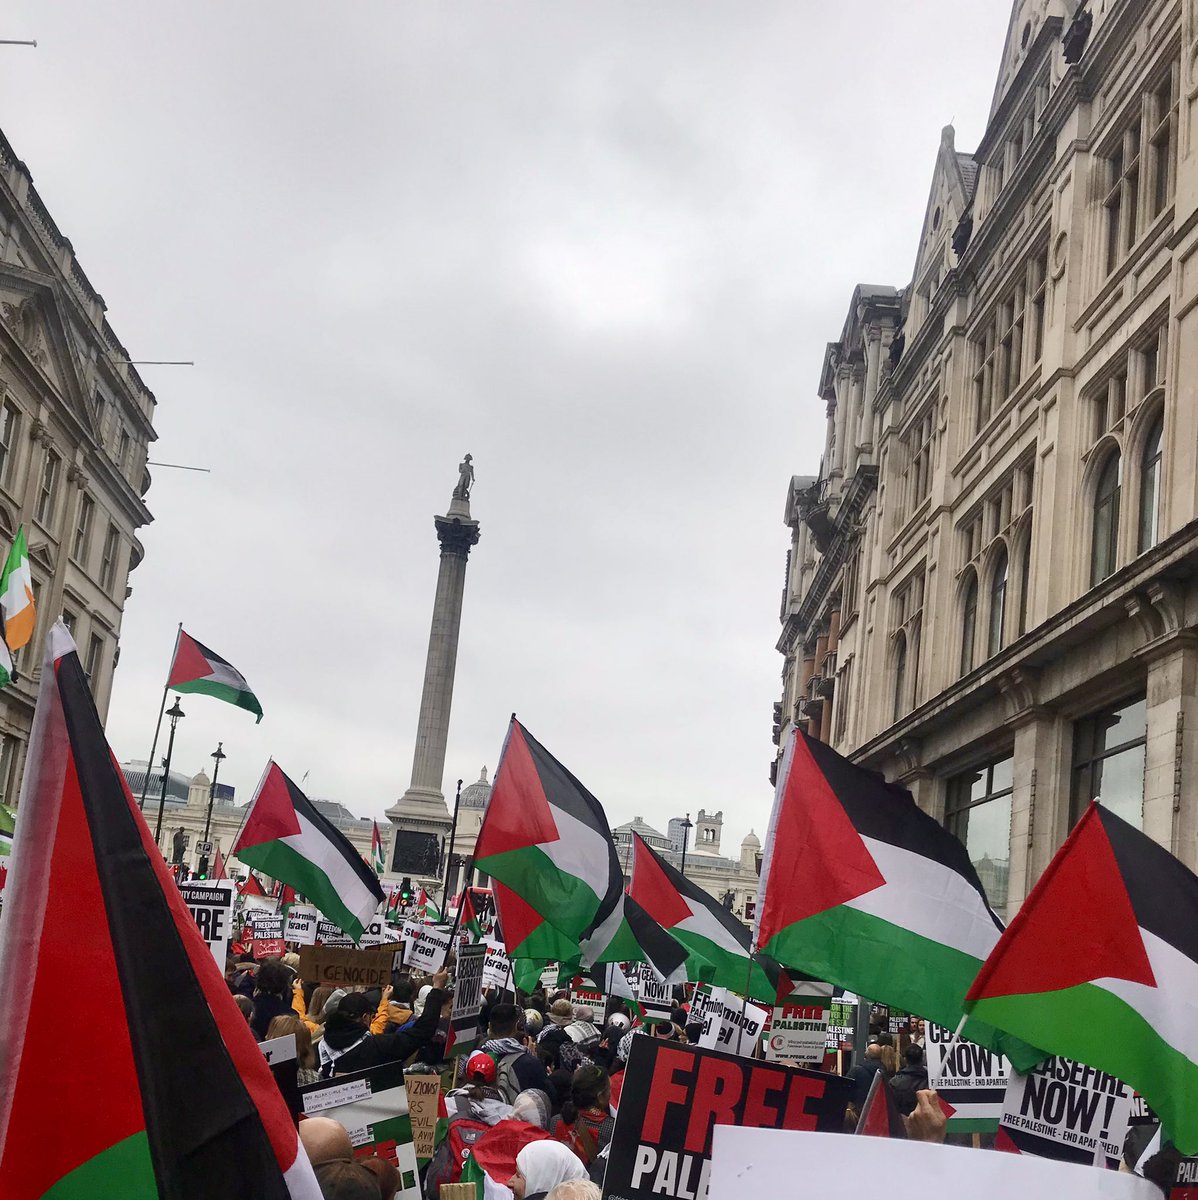 These protests aren’t getting any smaller.
Piccadilly filled with people. More flags and more banners and placards every time.
#StopArmingIsrael